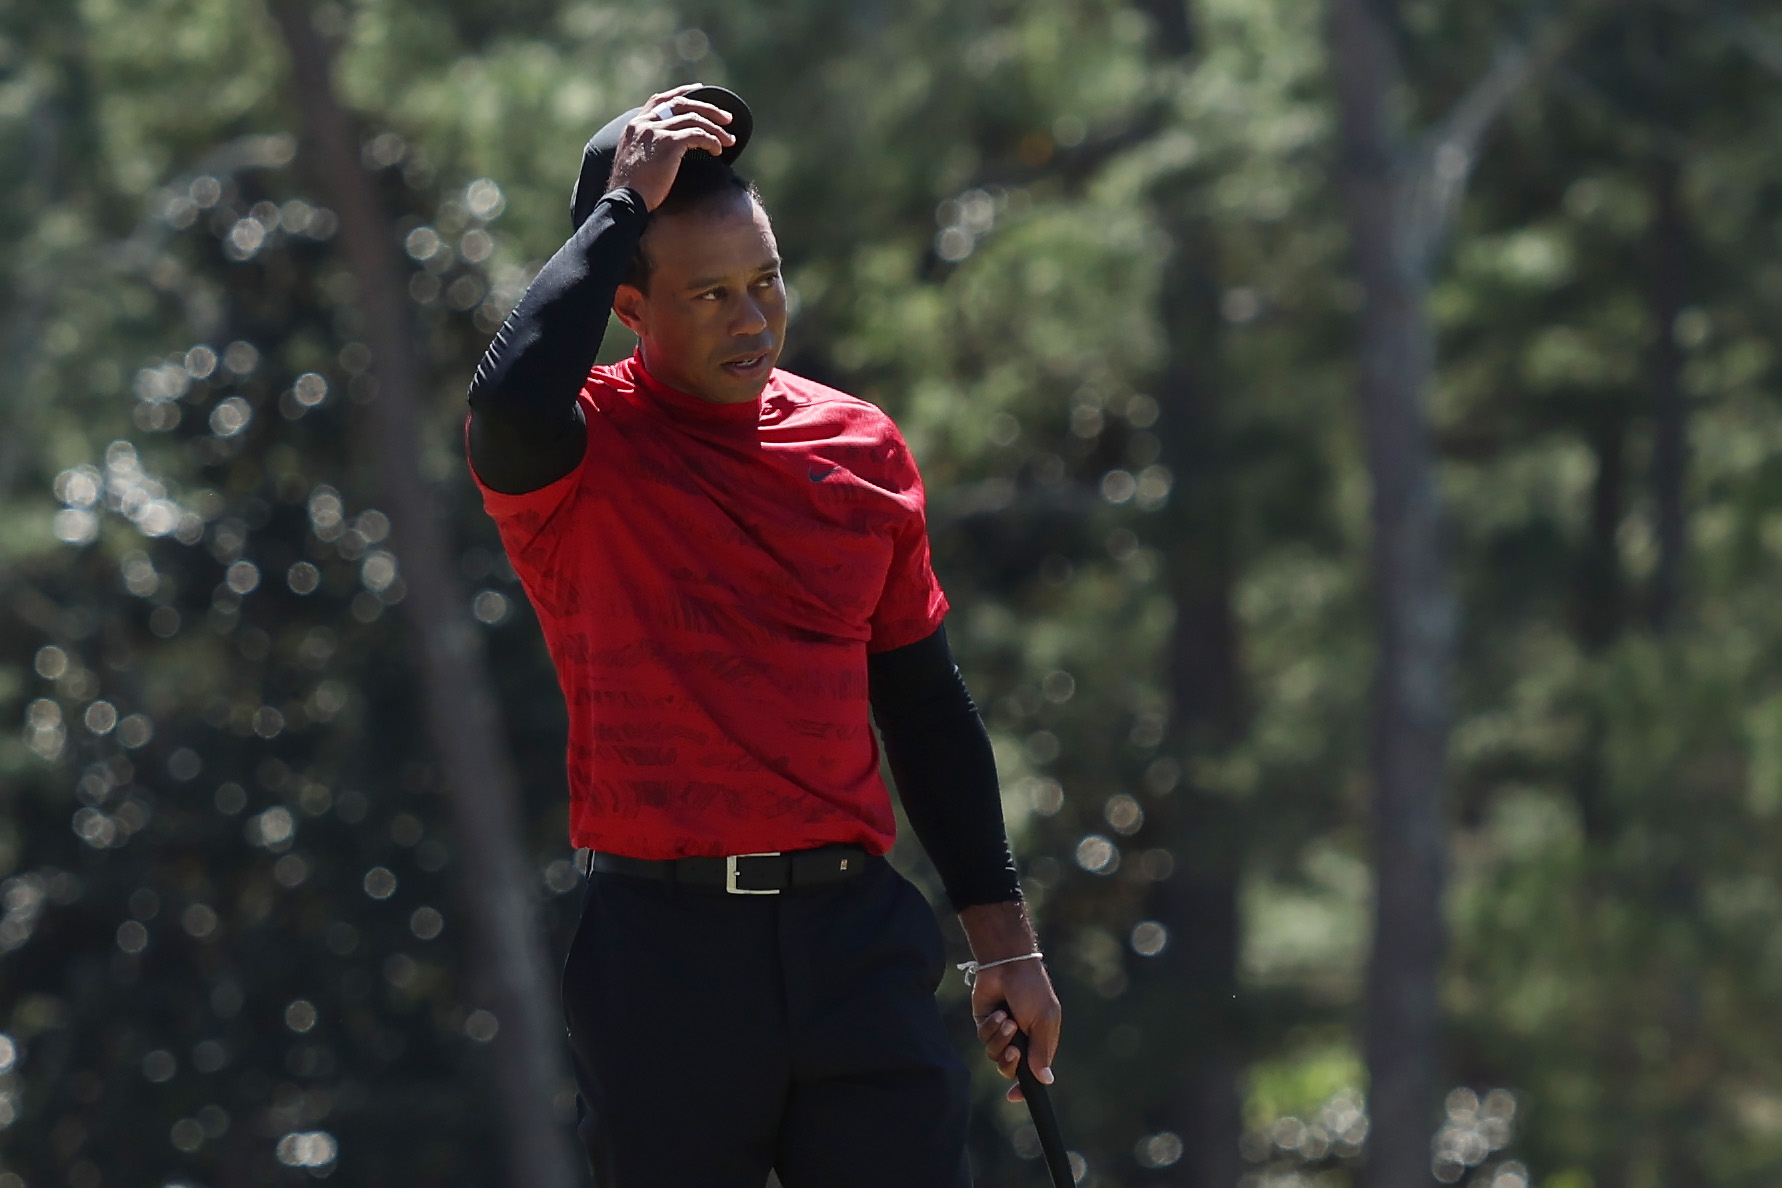 Tiger Woods tips his hat to the crowd on the 18th green after finishing his round during the final round of the Masters at Augusta National Golf Club on April 10, 2022 in Augusta, Georgia.